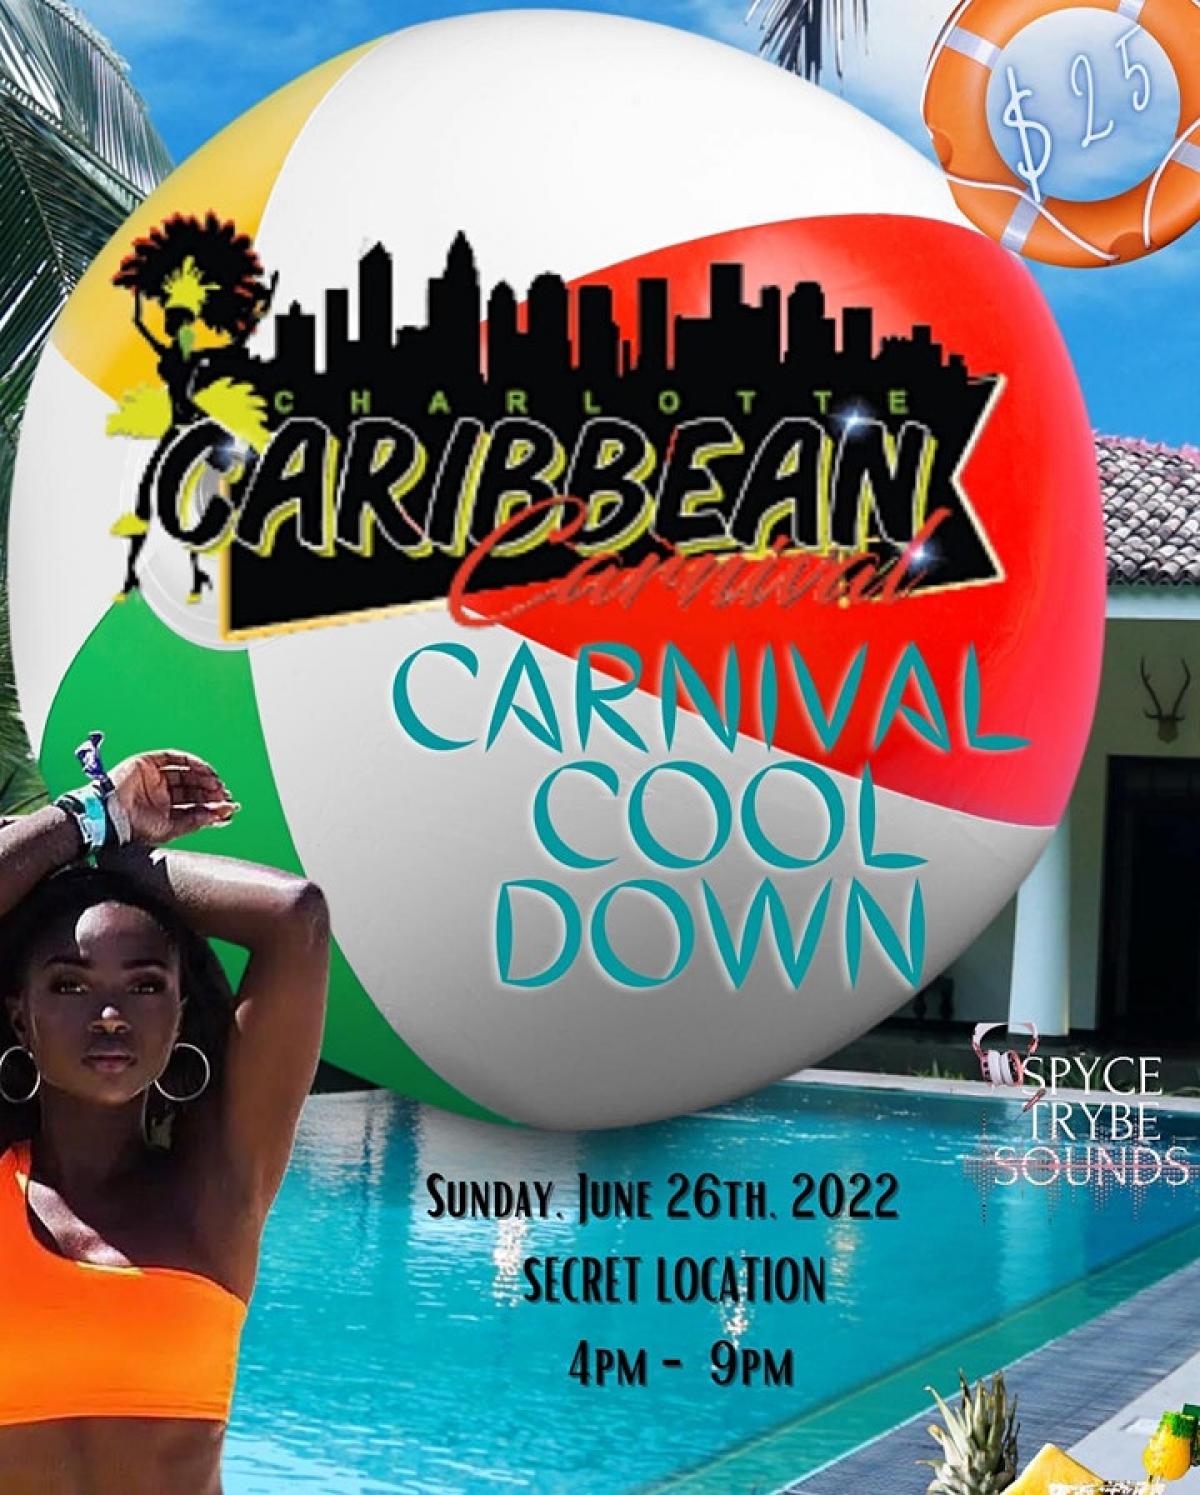 The Cool Down- Wet Fete flyer or graphic.